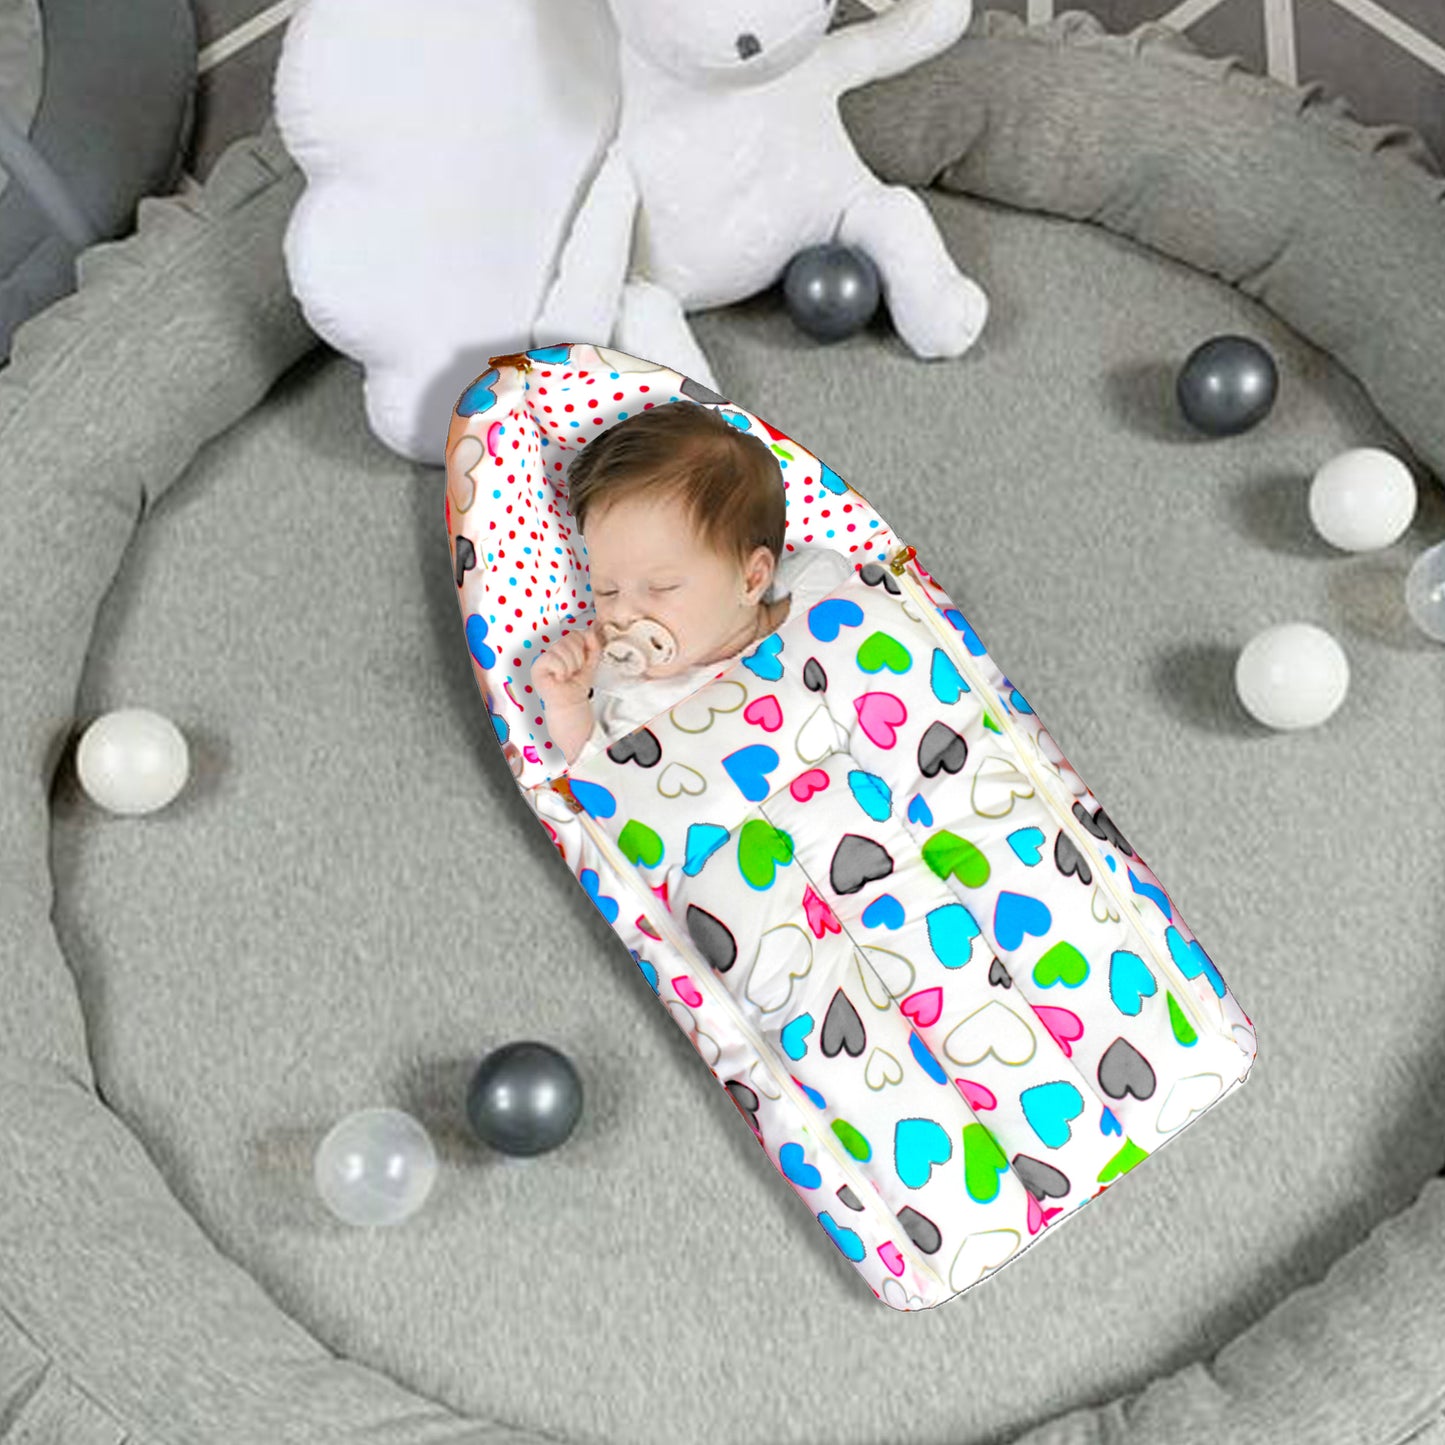 VParents daisy  Baby Feeding Pillow Bedding Set with Mosquito net and Sleeping Bag Combo Cotton, 0-6 Months, 3 Pcs